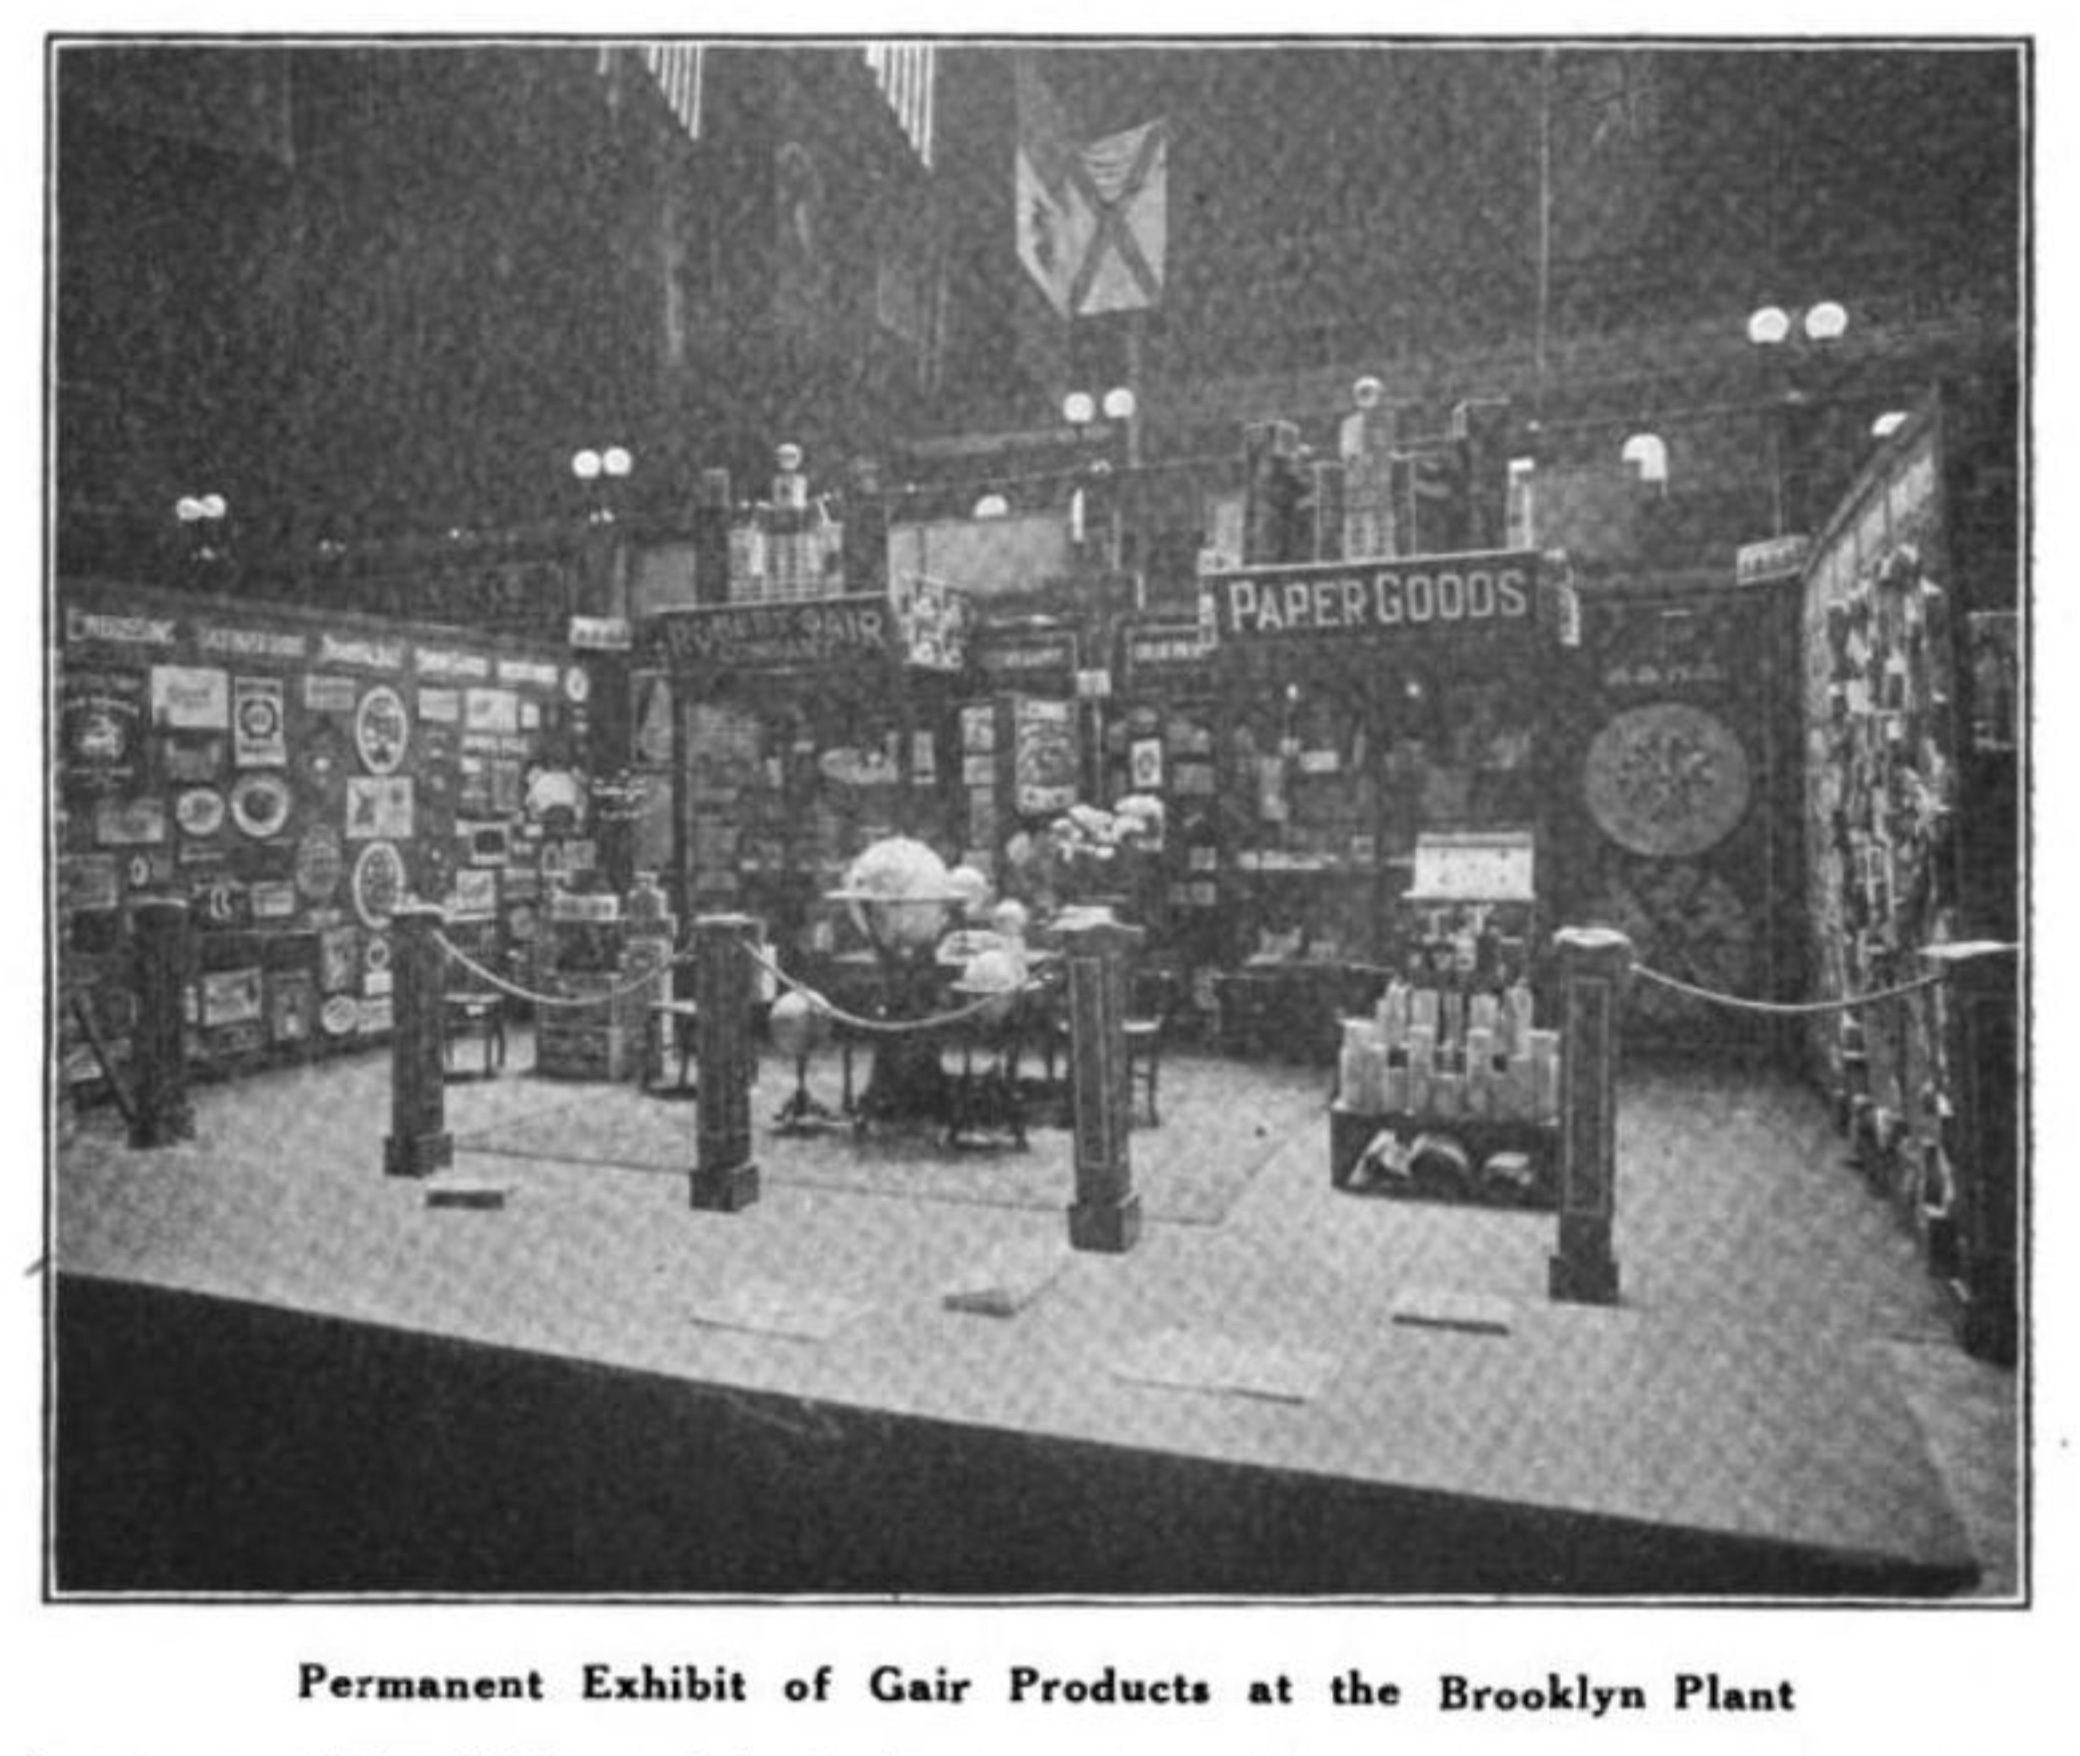 The Brooklyn plant featured a permanent exhibit displaying a wide variety of products produced by the company (internally referred to as "Gaircraft") – the legacy of Robert Gair